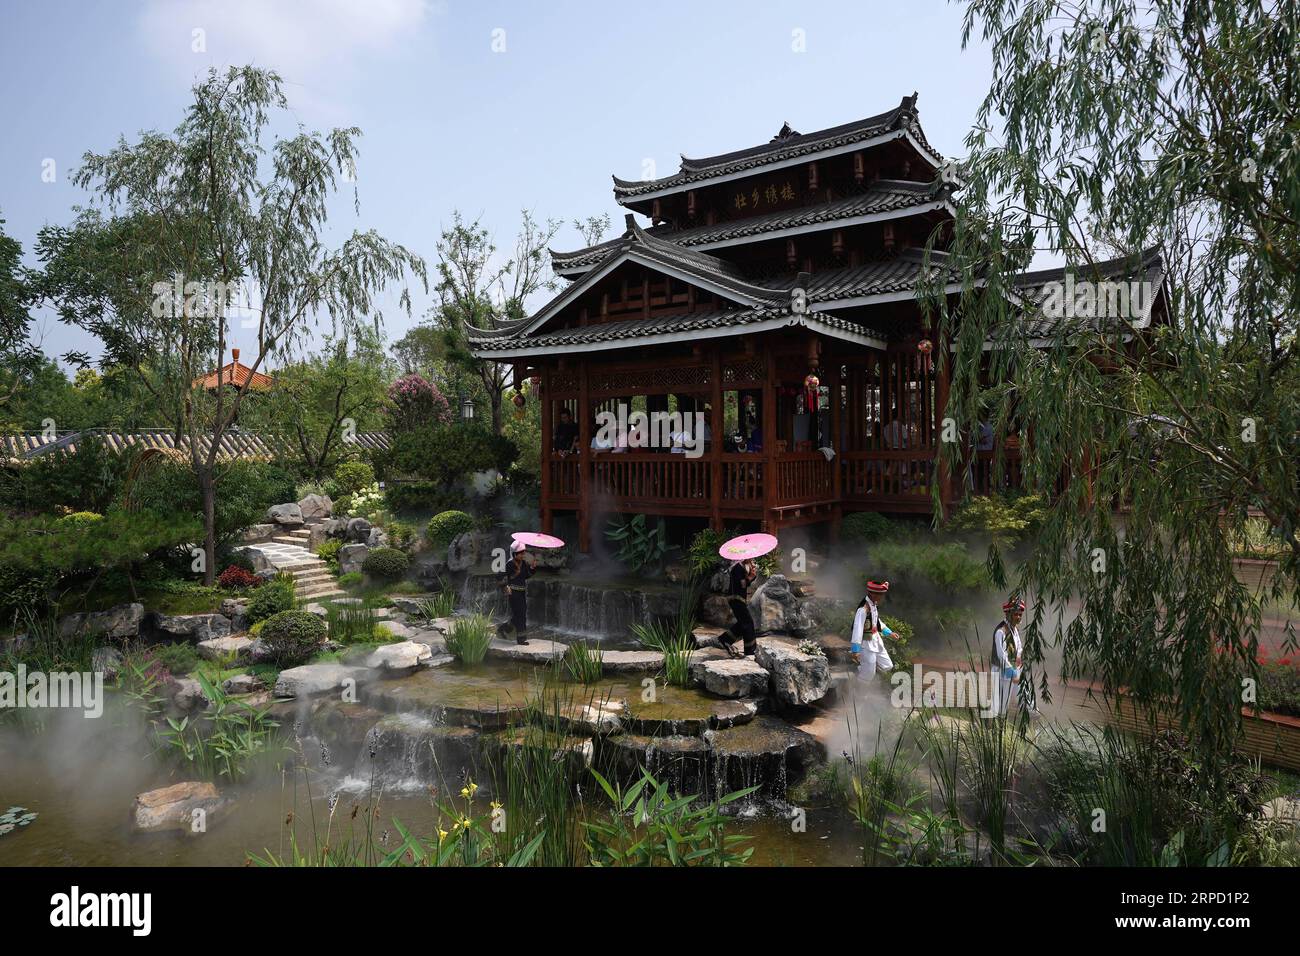 (190719) -- BEIJING, July 19, 2019 -- Tourists visit the Guangxi Garden at the Beijing International Horticultural Exhibition in Beijing, capital of China, July 18, 2019. Located in south China, Guangxi boasts high forest coverage of over 62 percent and various landforms including its picturesque karst mountains. In recent years, following the principle of building ecological civilization, Guangxi authorities uphold green development in agricultural production and poverty alleviation. Meanwhile, the authorities take various measures to improve rural environment including expanding forest cover Stock Photo